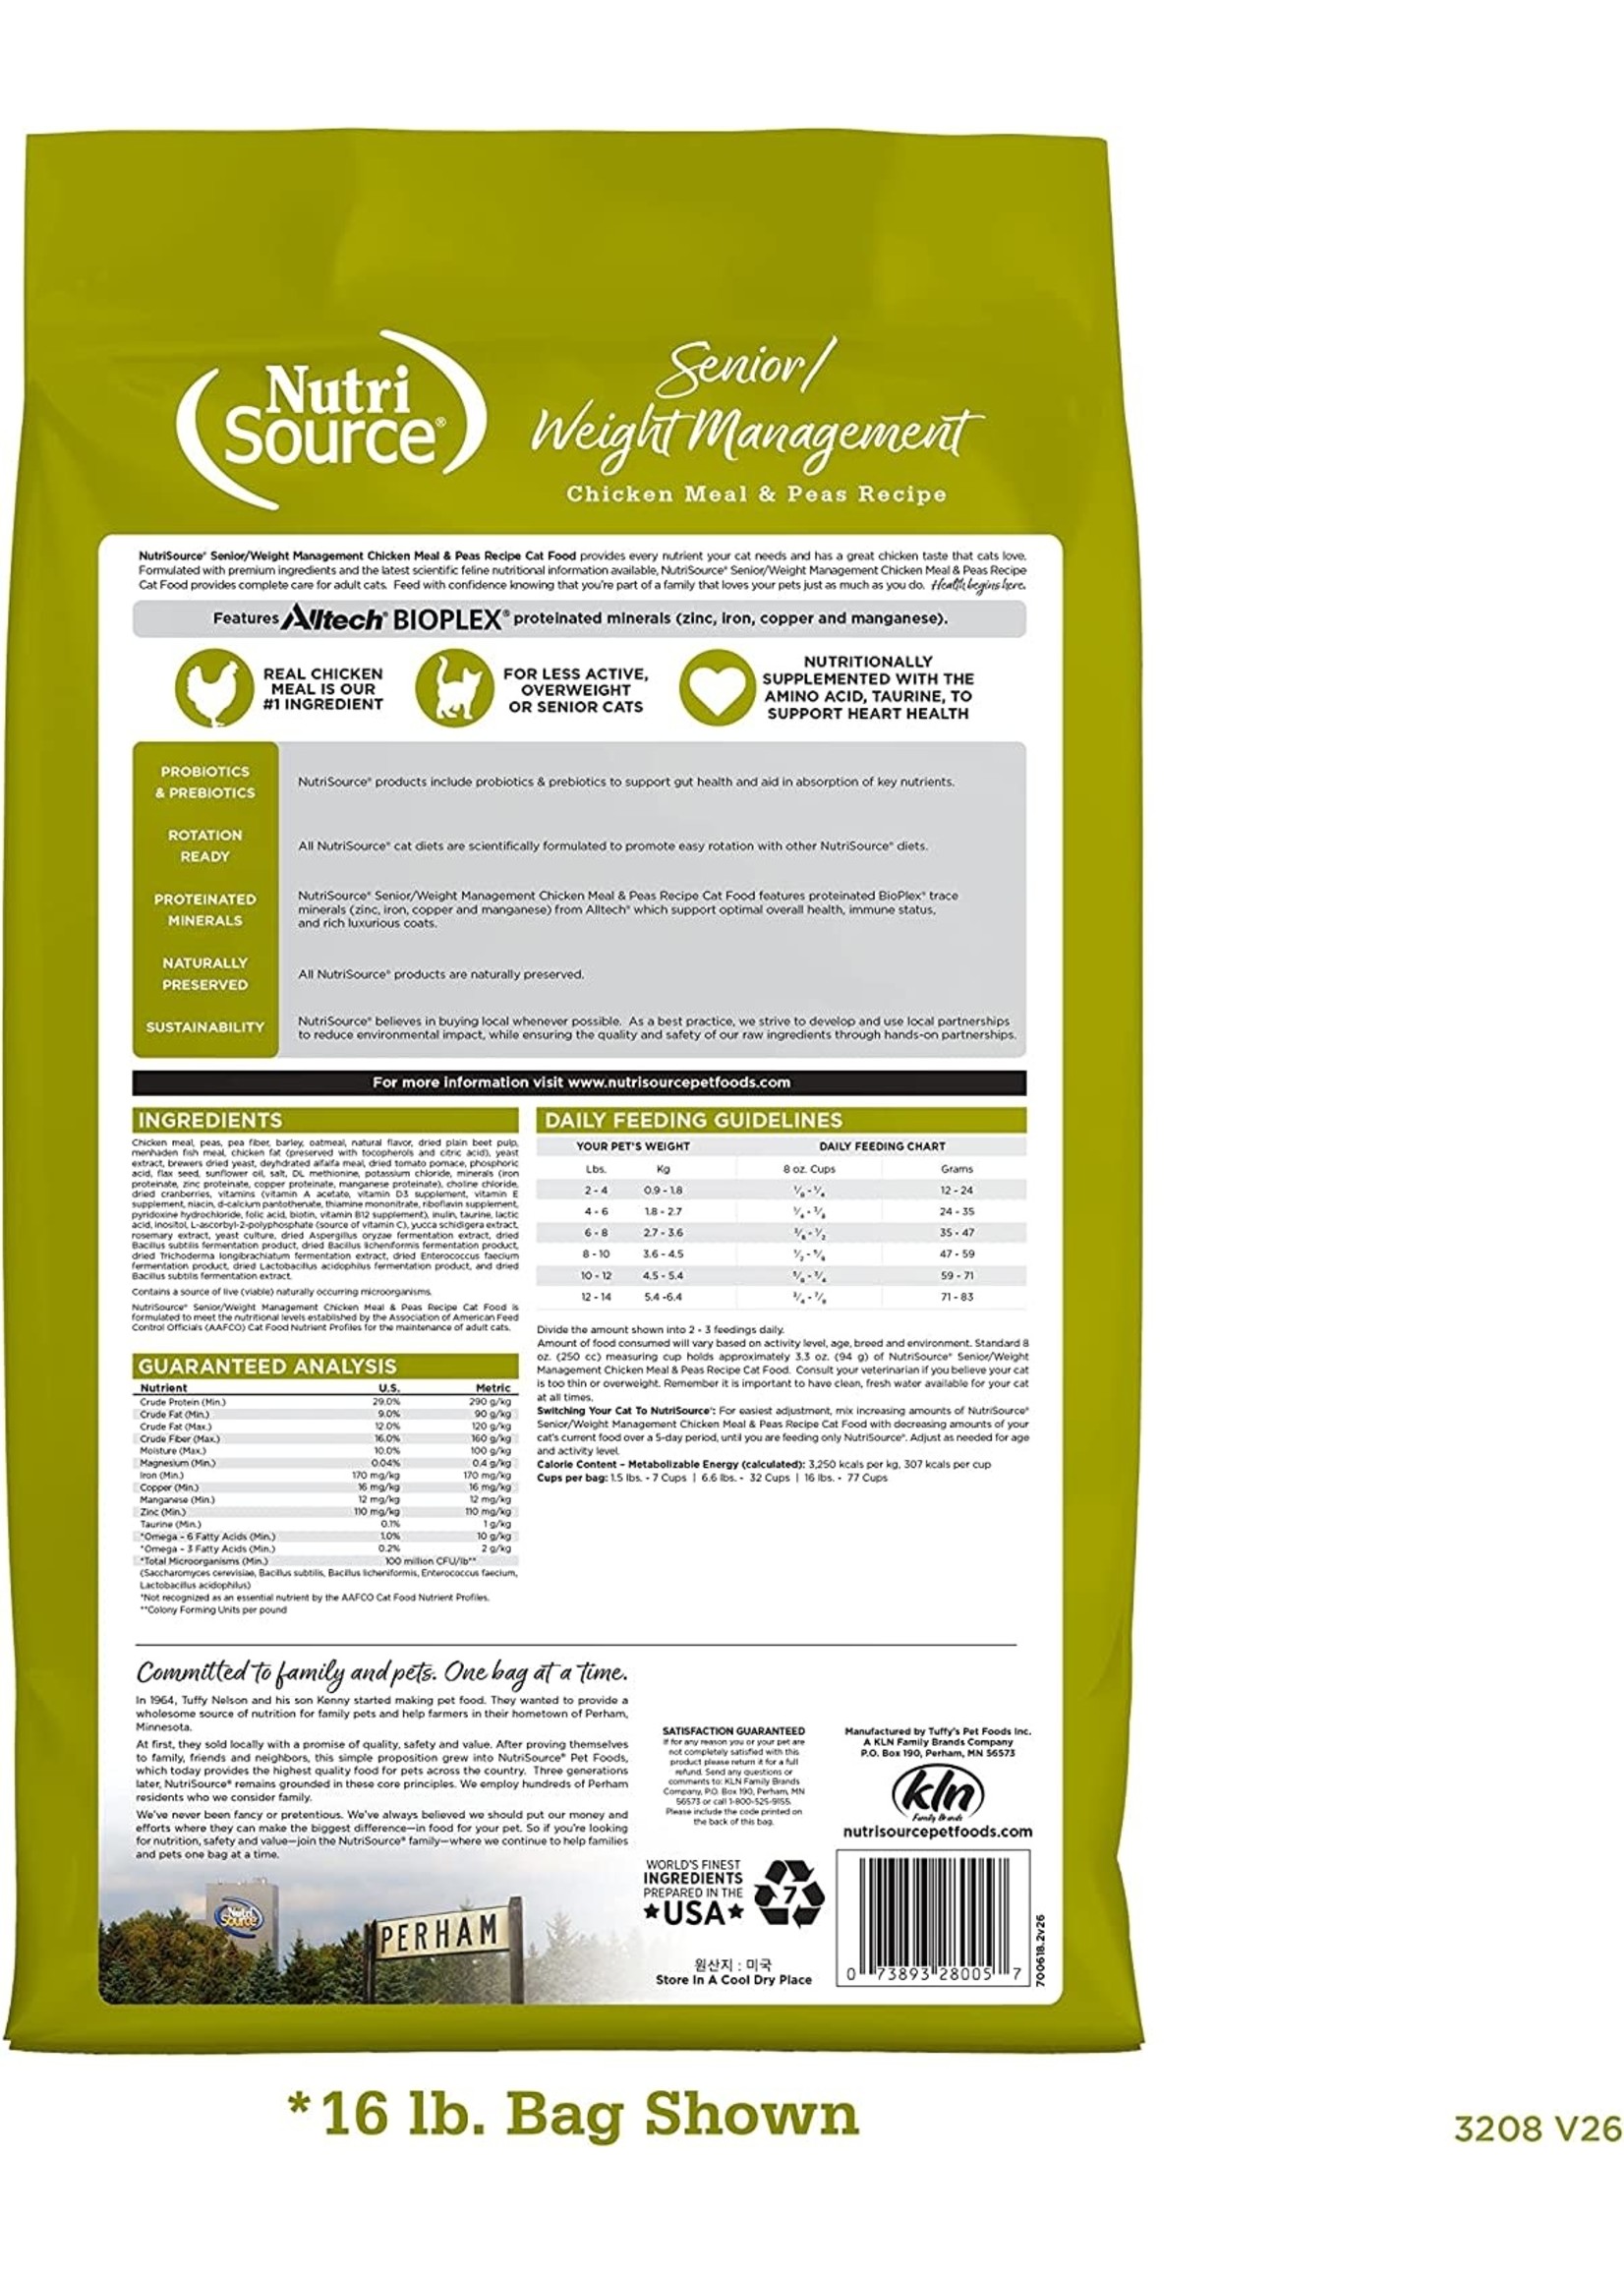 Nutrisource Cat Food Senior Weight Management Chicken Meal & Peas Recipe